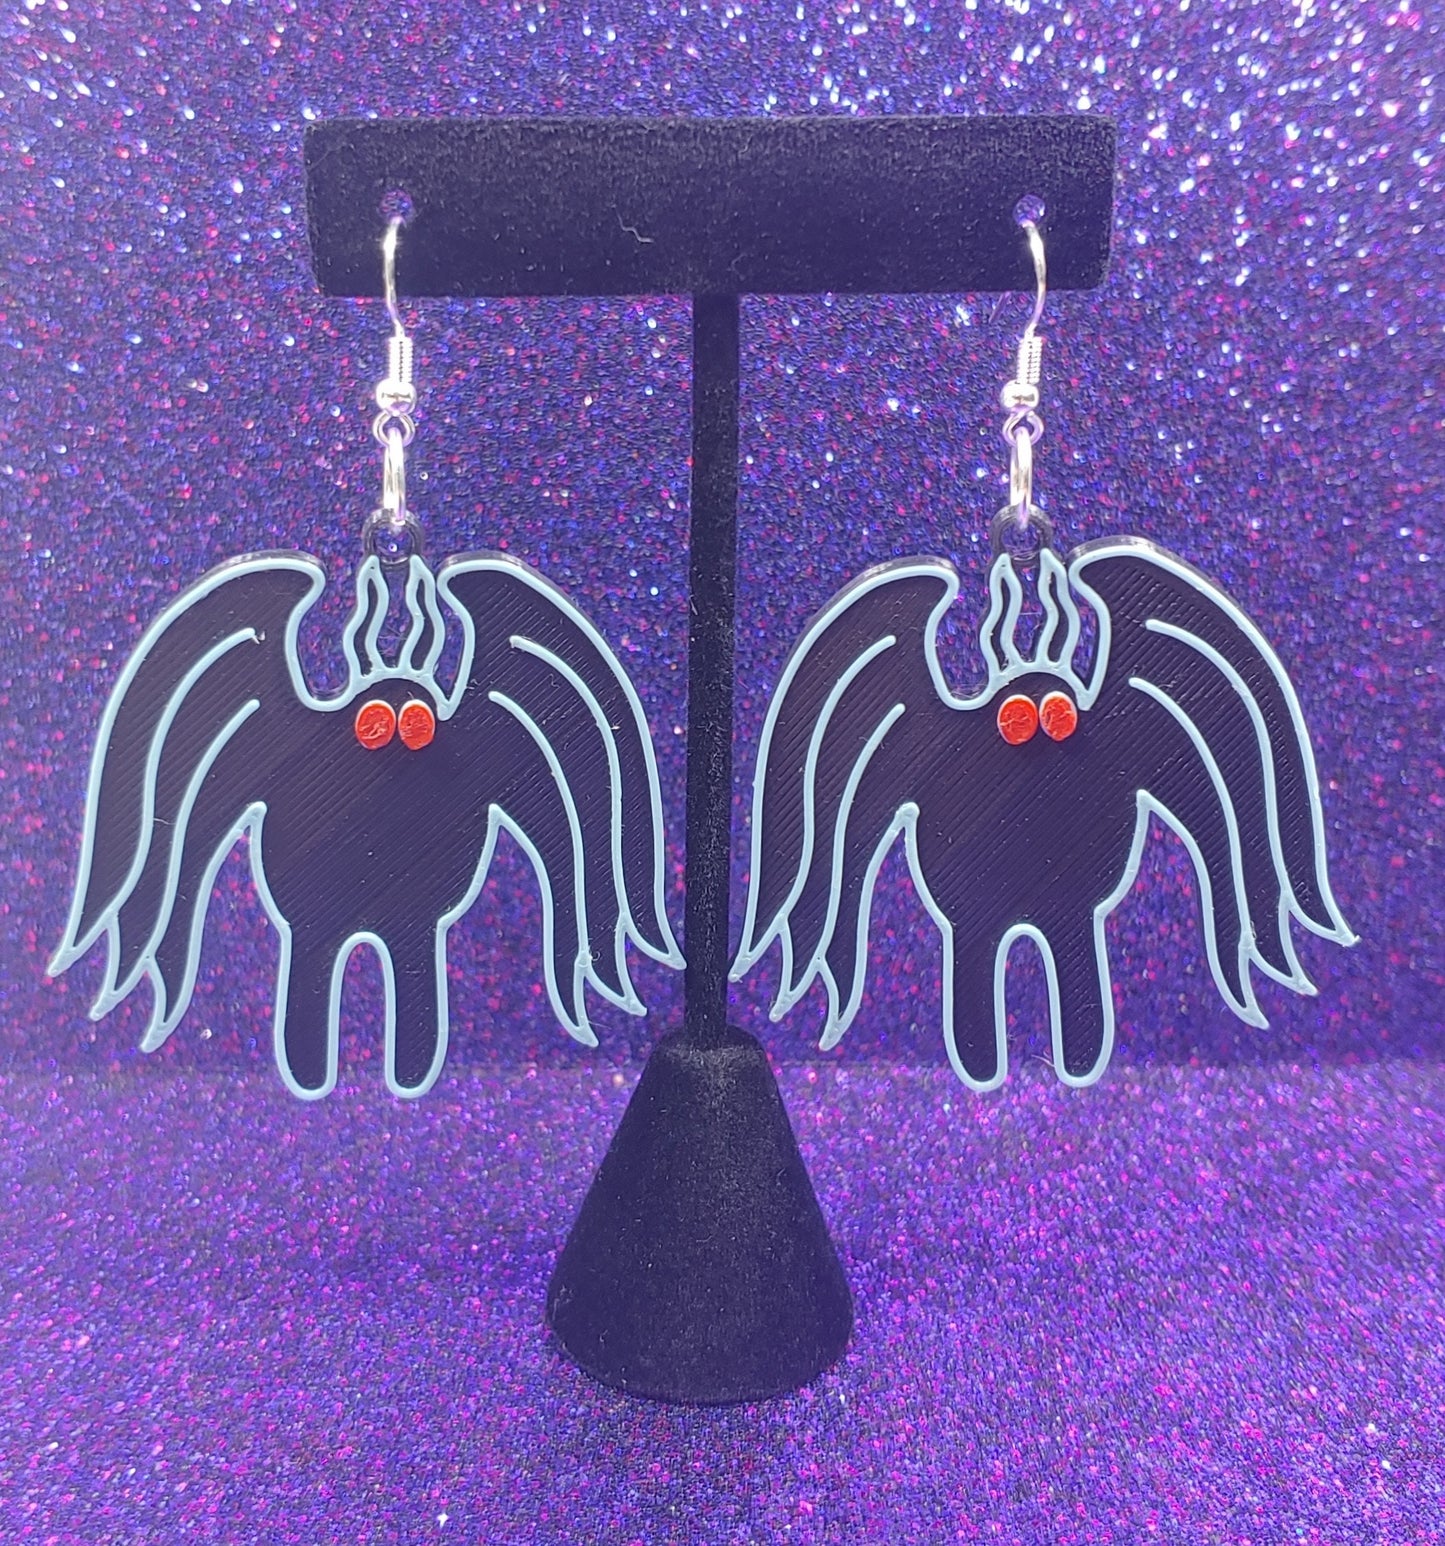 Mothman Cryptid Statement Earrings 3D Printed